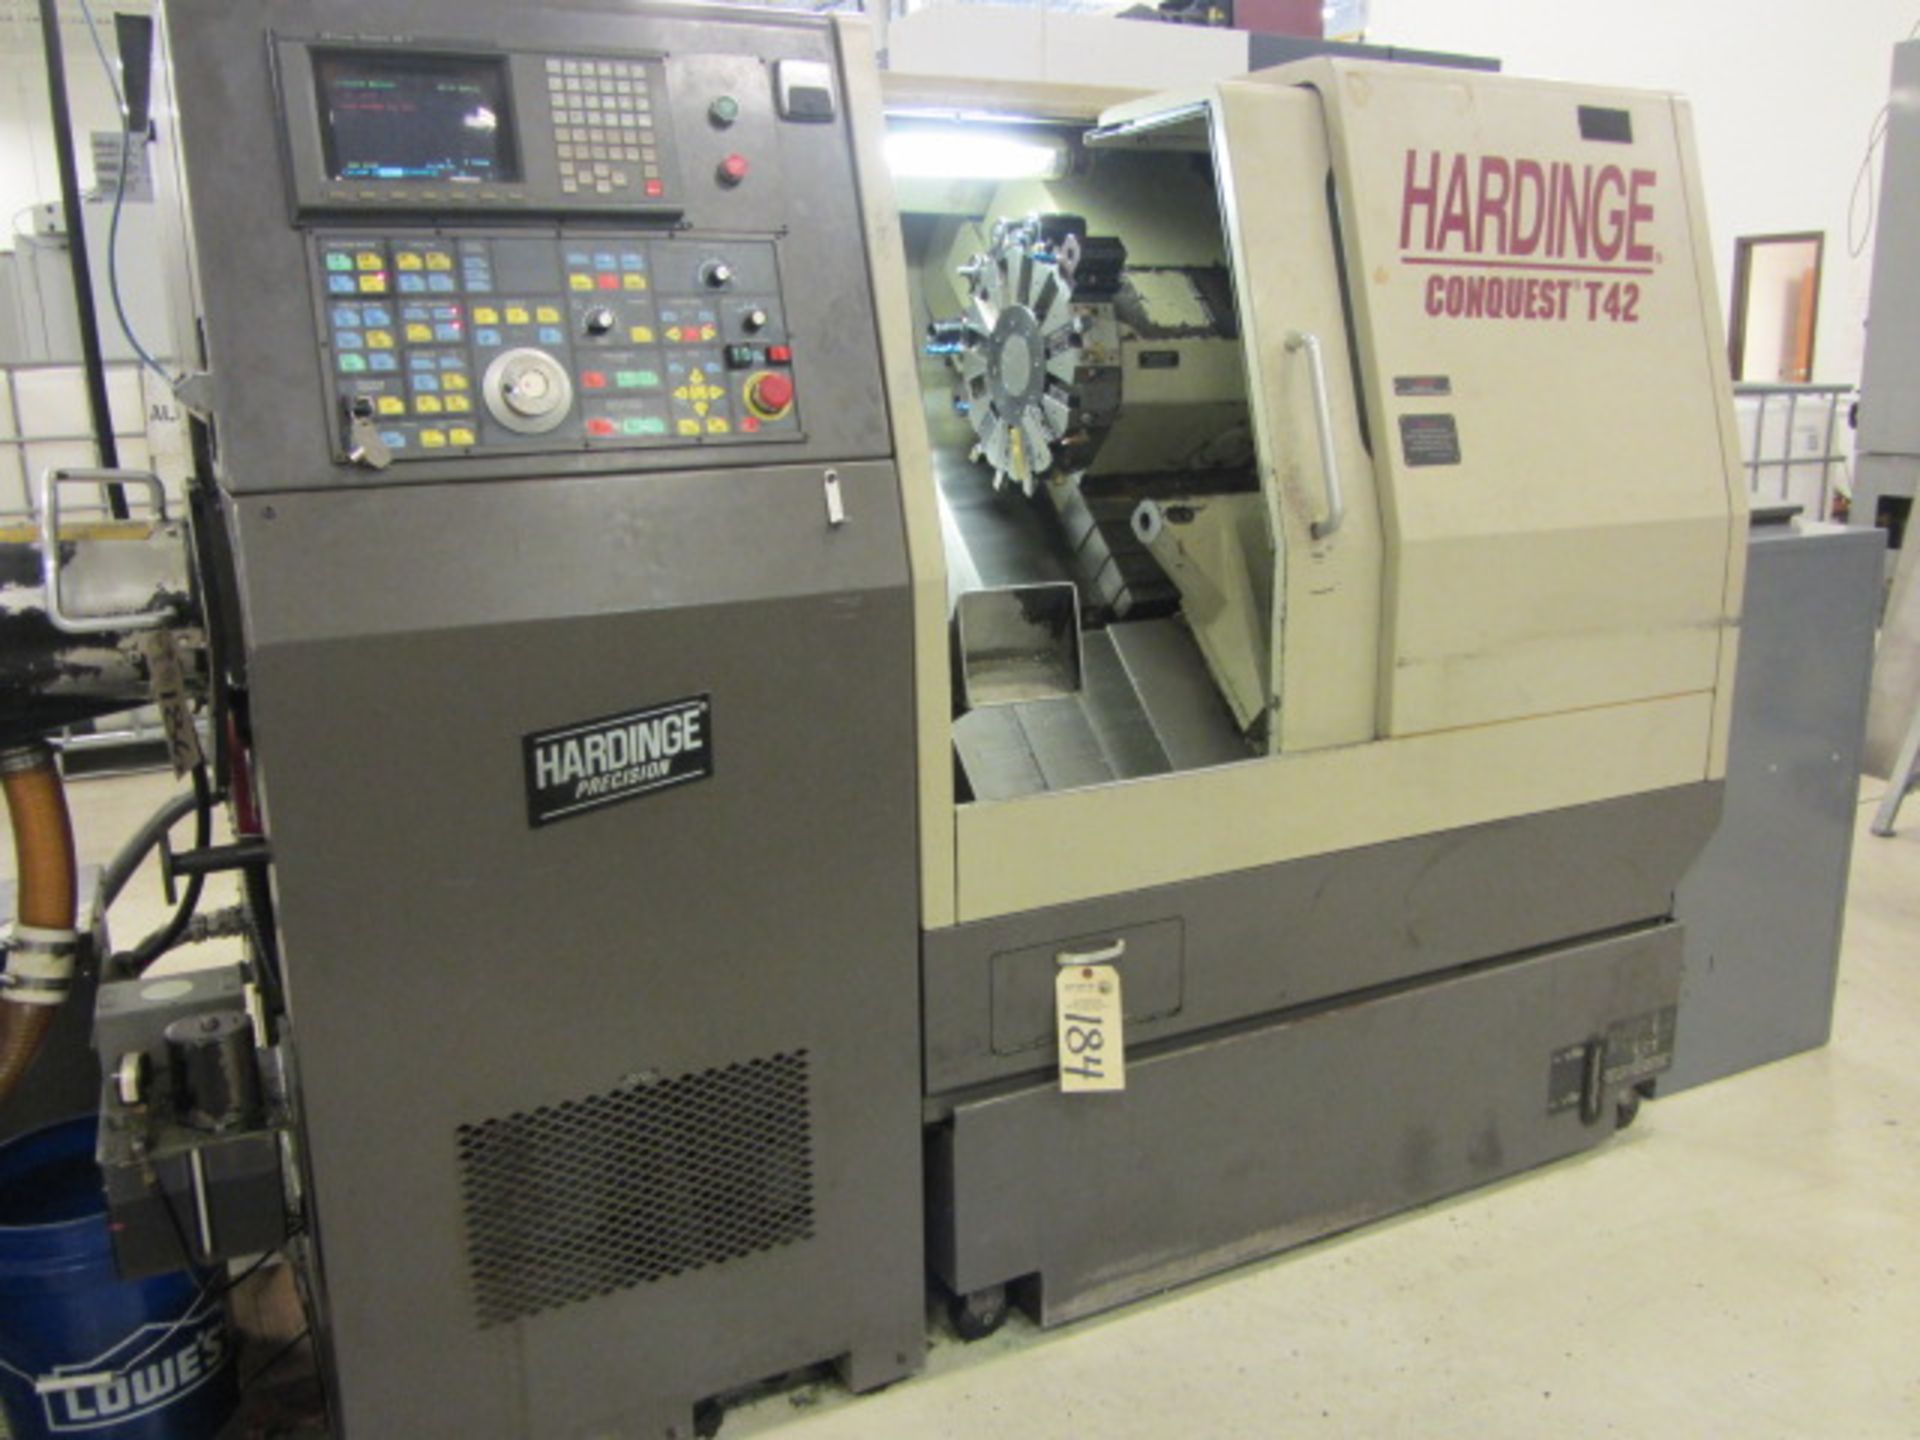 Hardinge Conquest T42 CNC Turning Center with 6'' Chuck, Collet Spindle Nose, Spindle Speeds to 5000 - Bild 8 aus 9